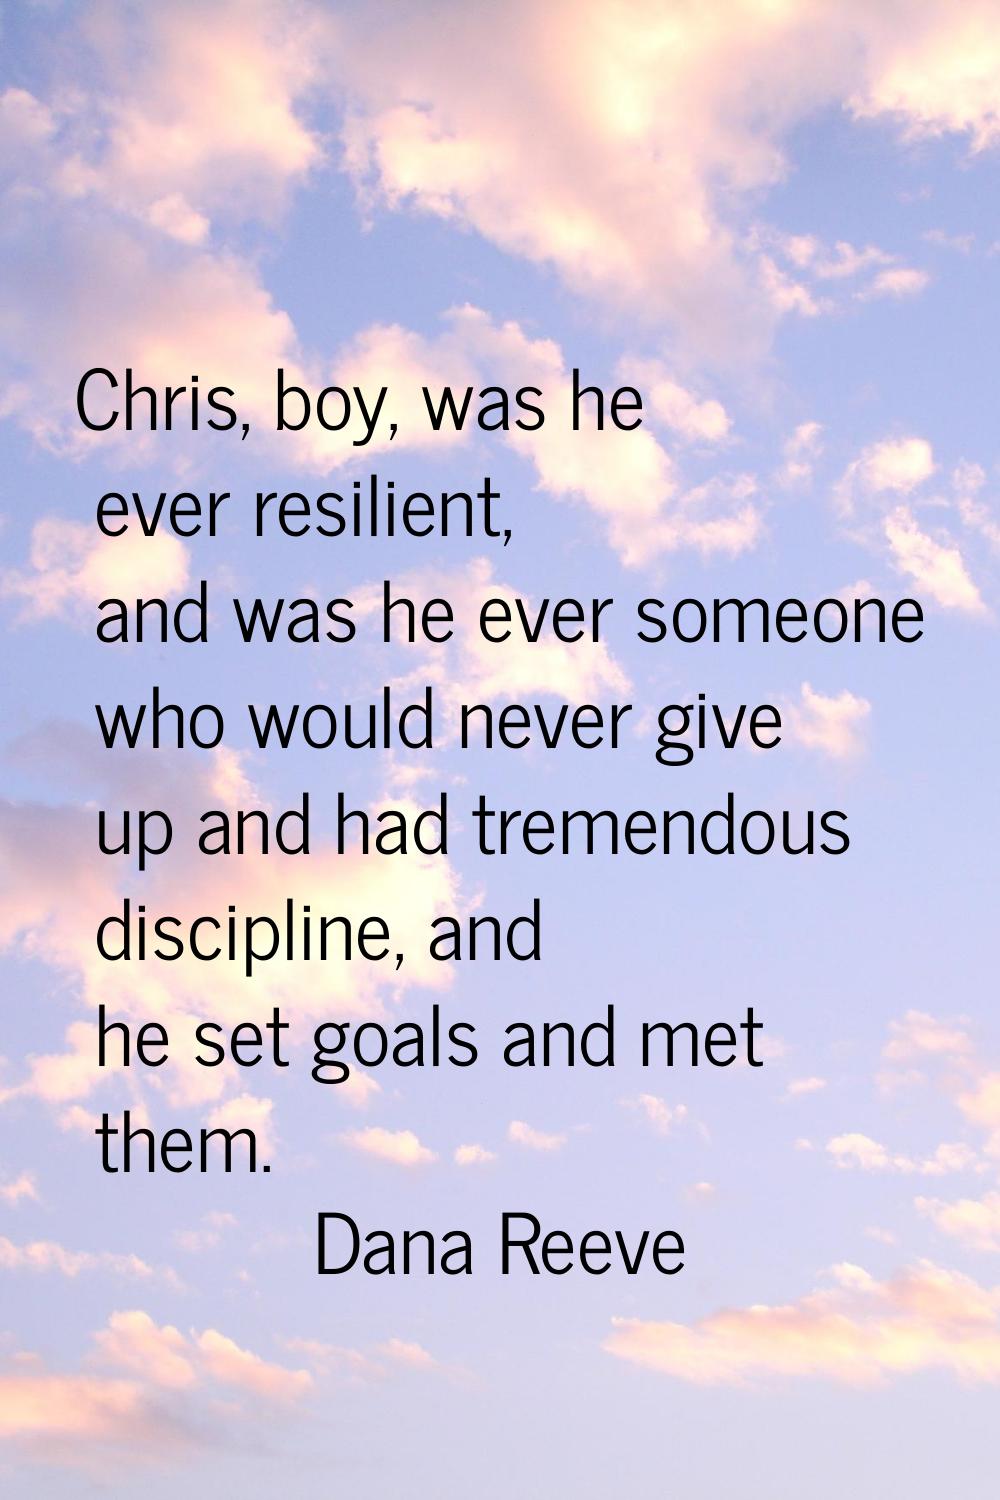 Chris, boy, was he ever resilient, and was he ever someone who would never give up and had tremendo